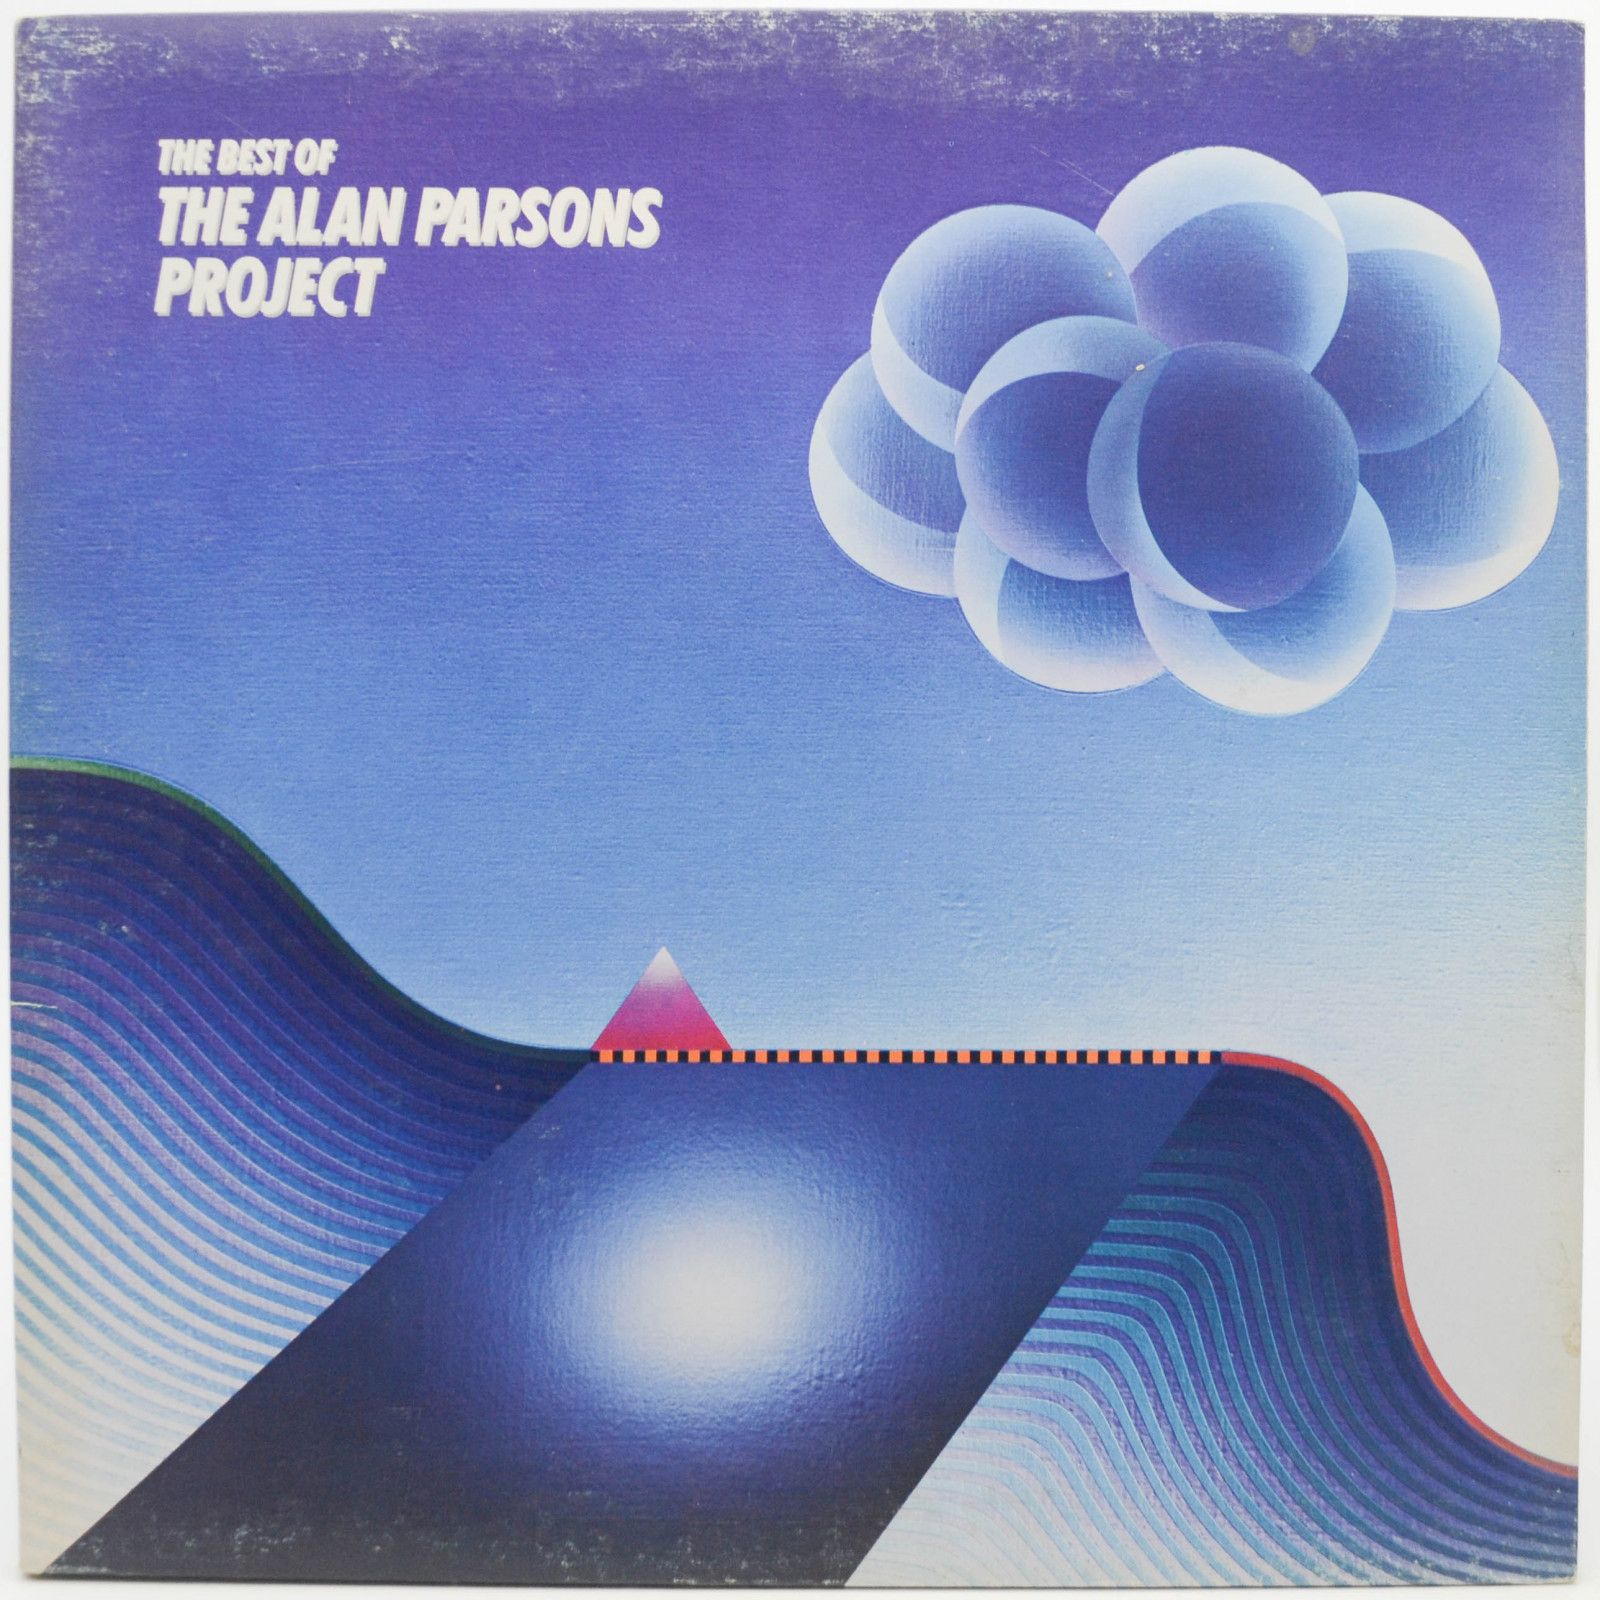 Alan Parsons Project — The Best Of The Alan Parsons Project, 1983